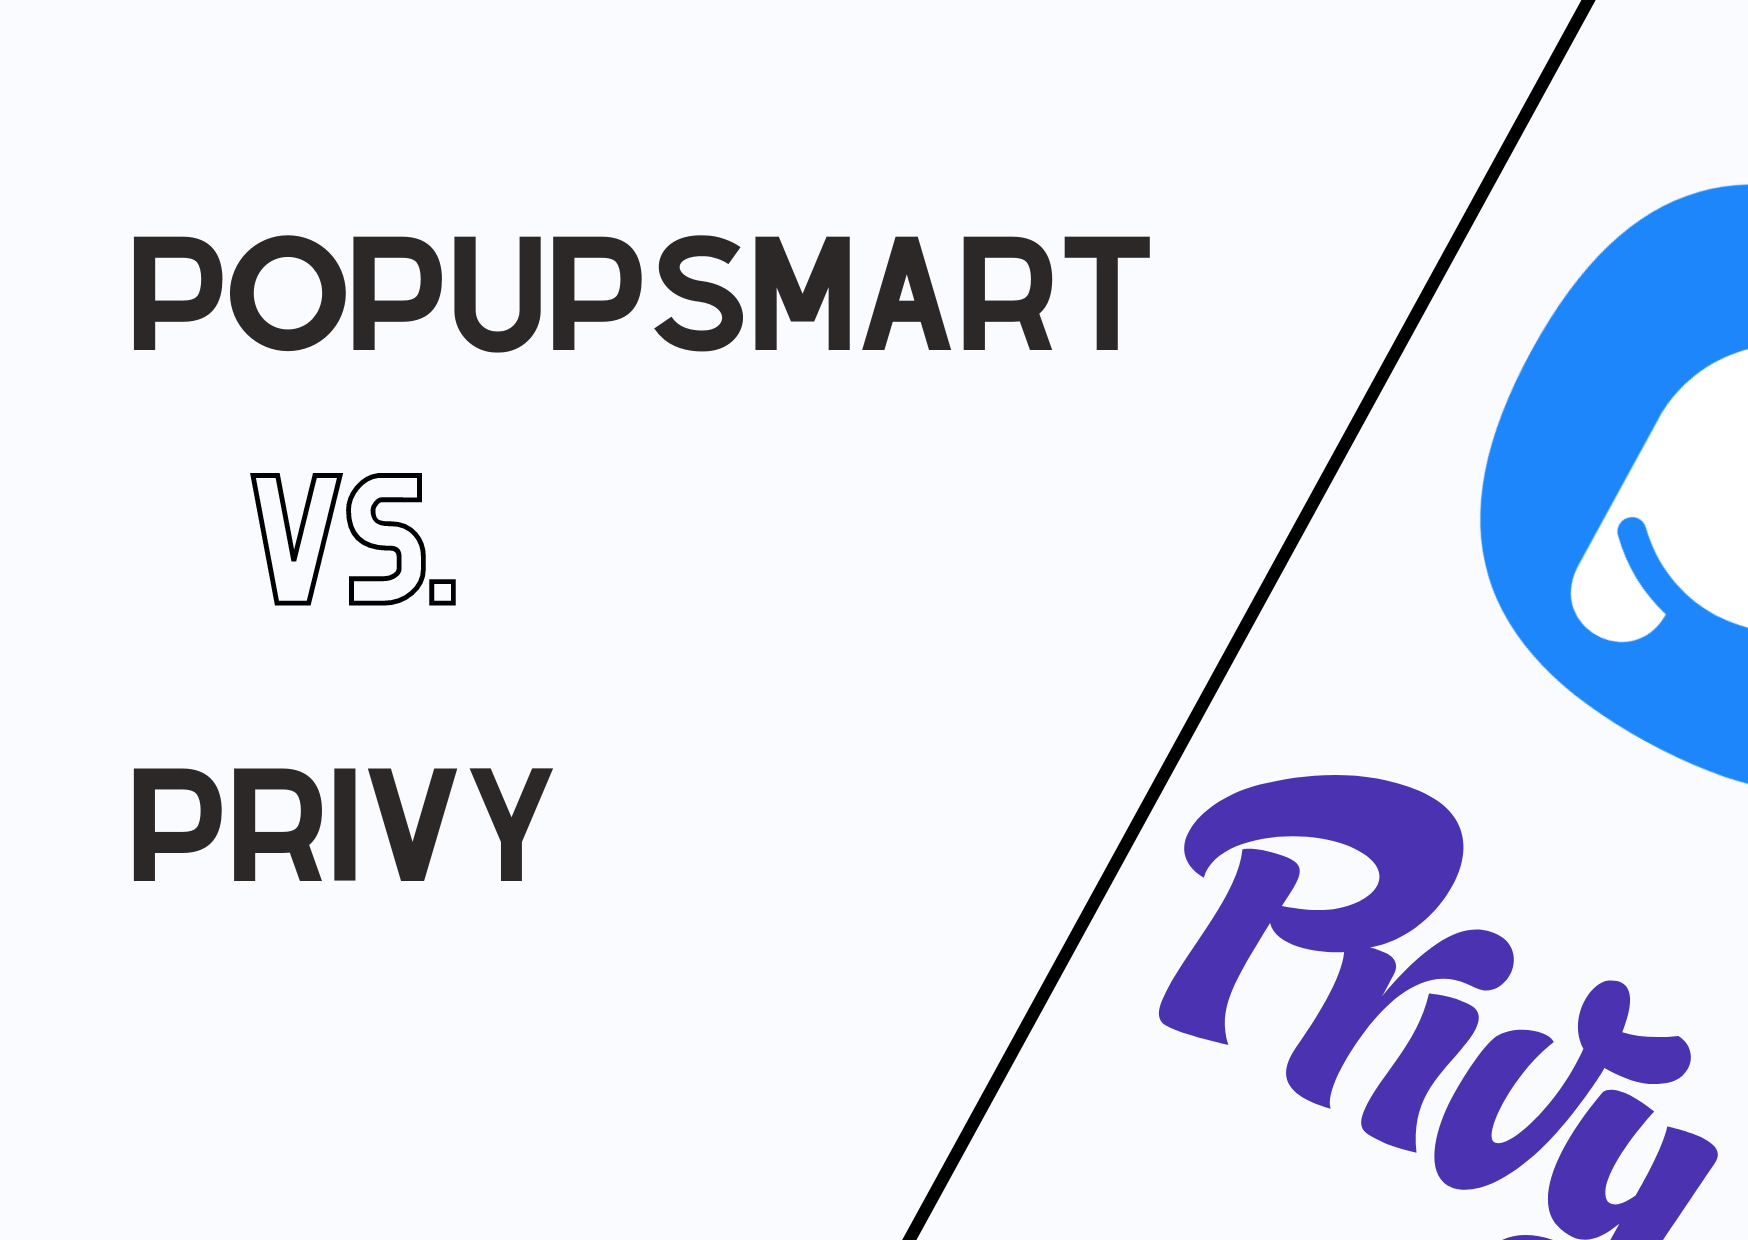 the comparison of Popupsmart and Privy 